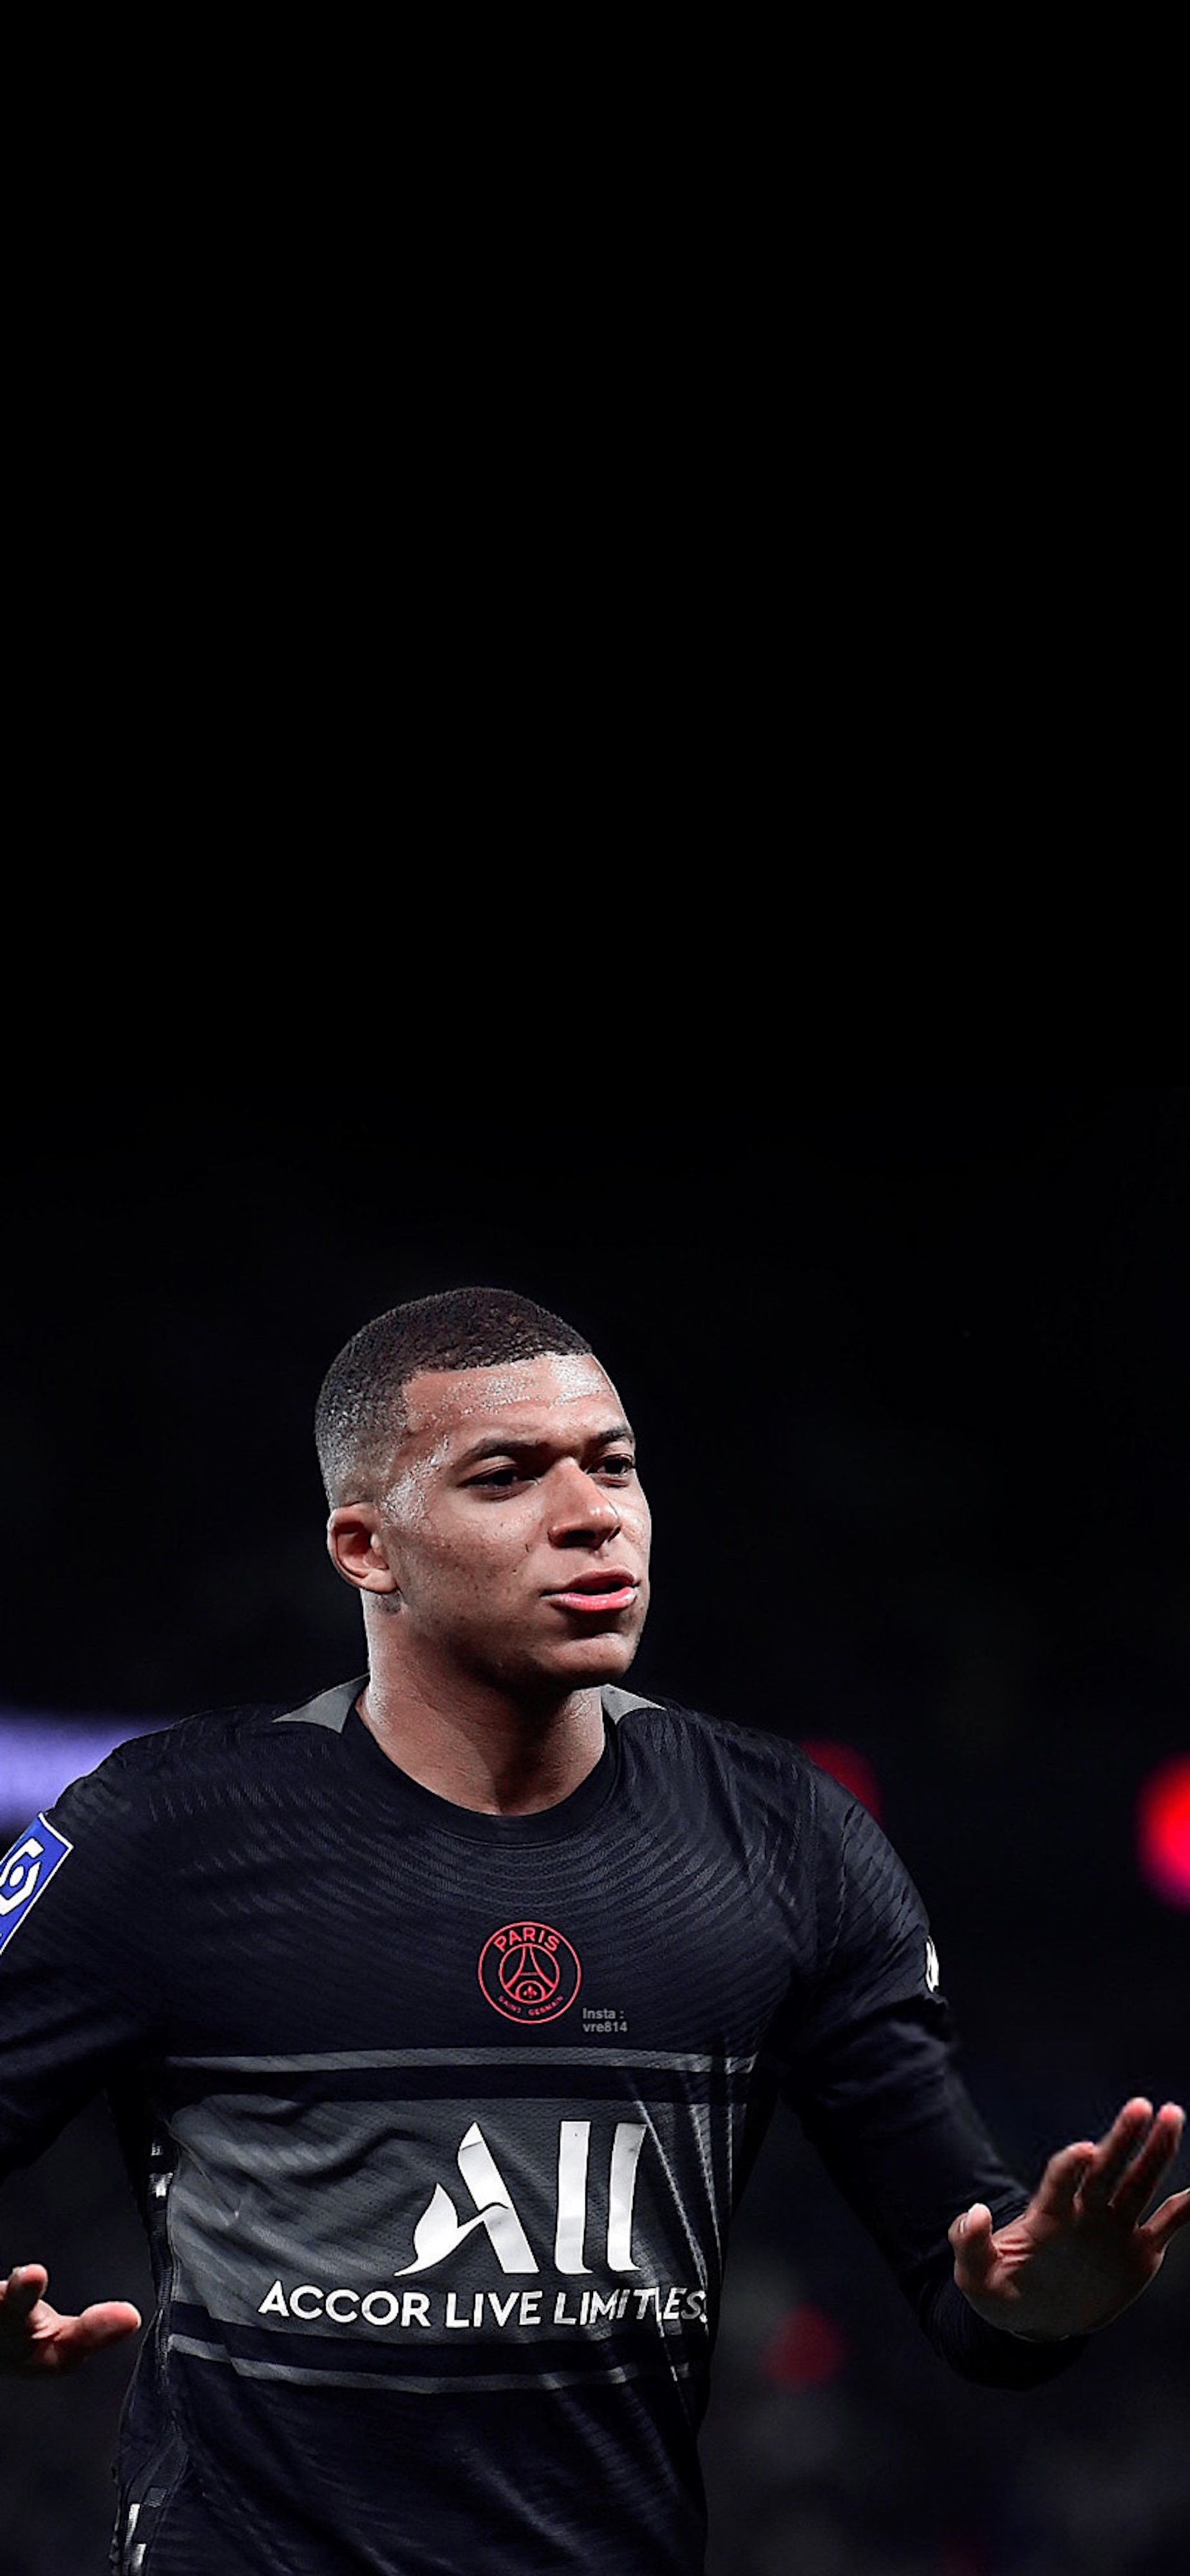 Mbappe PSG 2022 Wallpapers - Wallpaper Cave